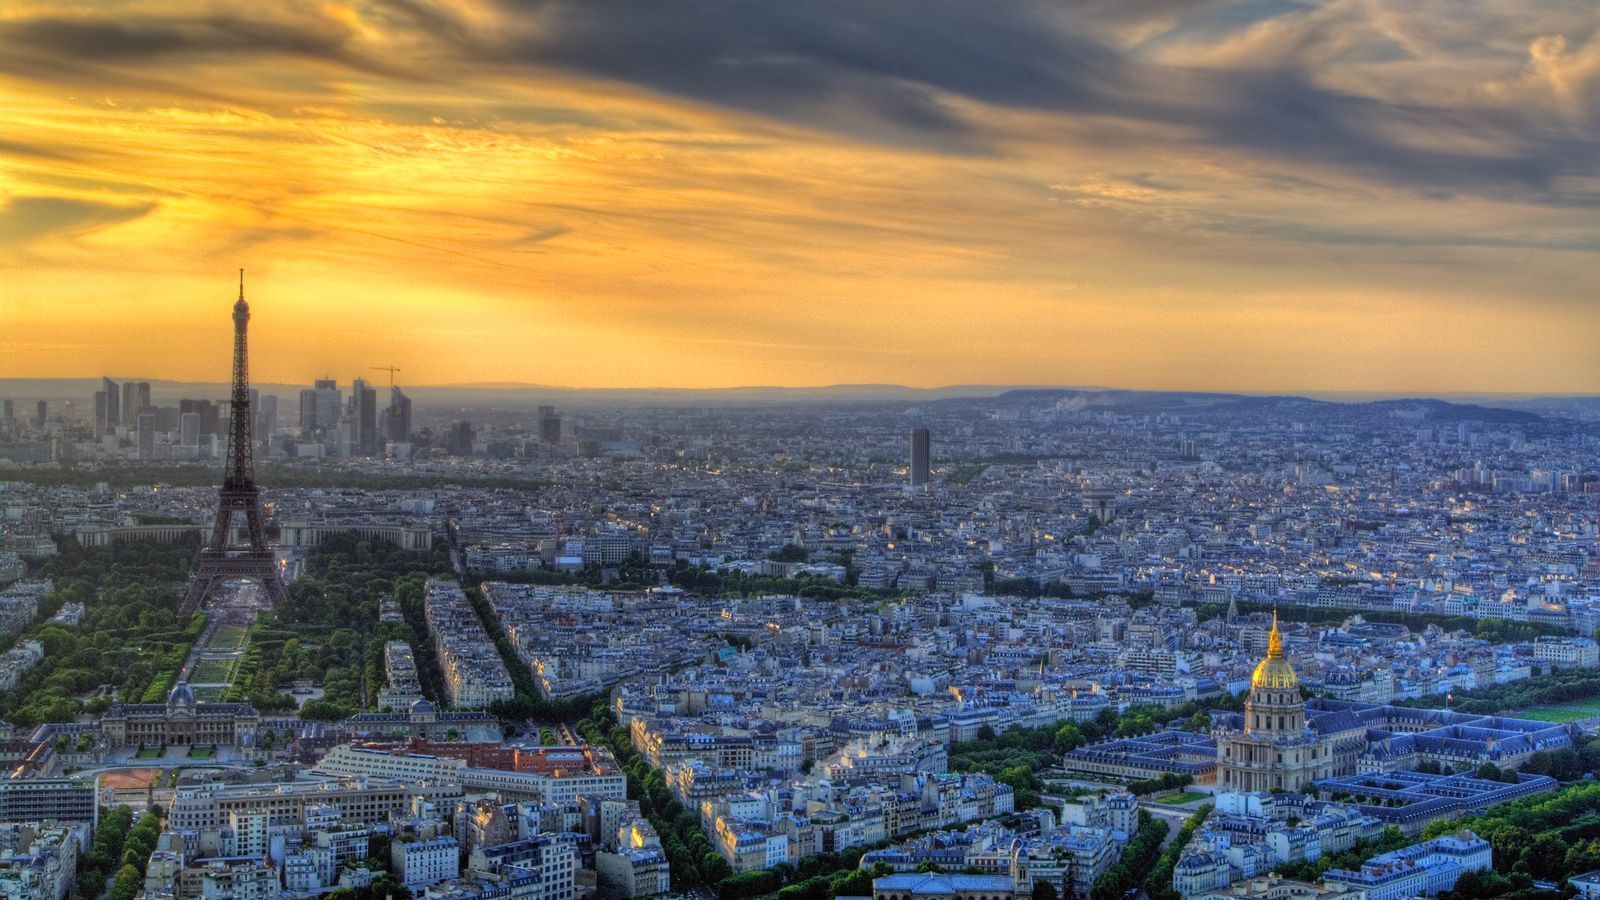 Download wallpaper 1600x900 paris, france, city, height widescreen 16:9 HD background - France